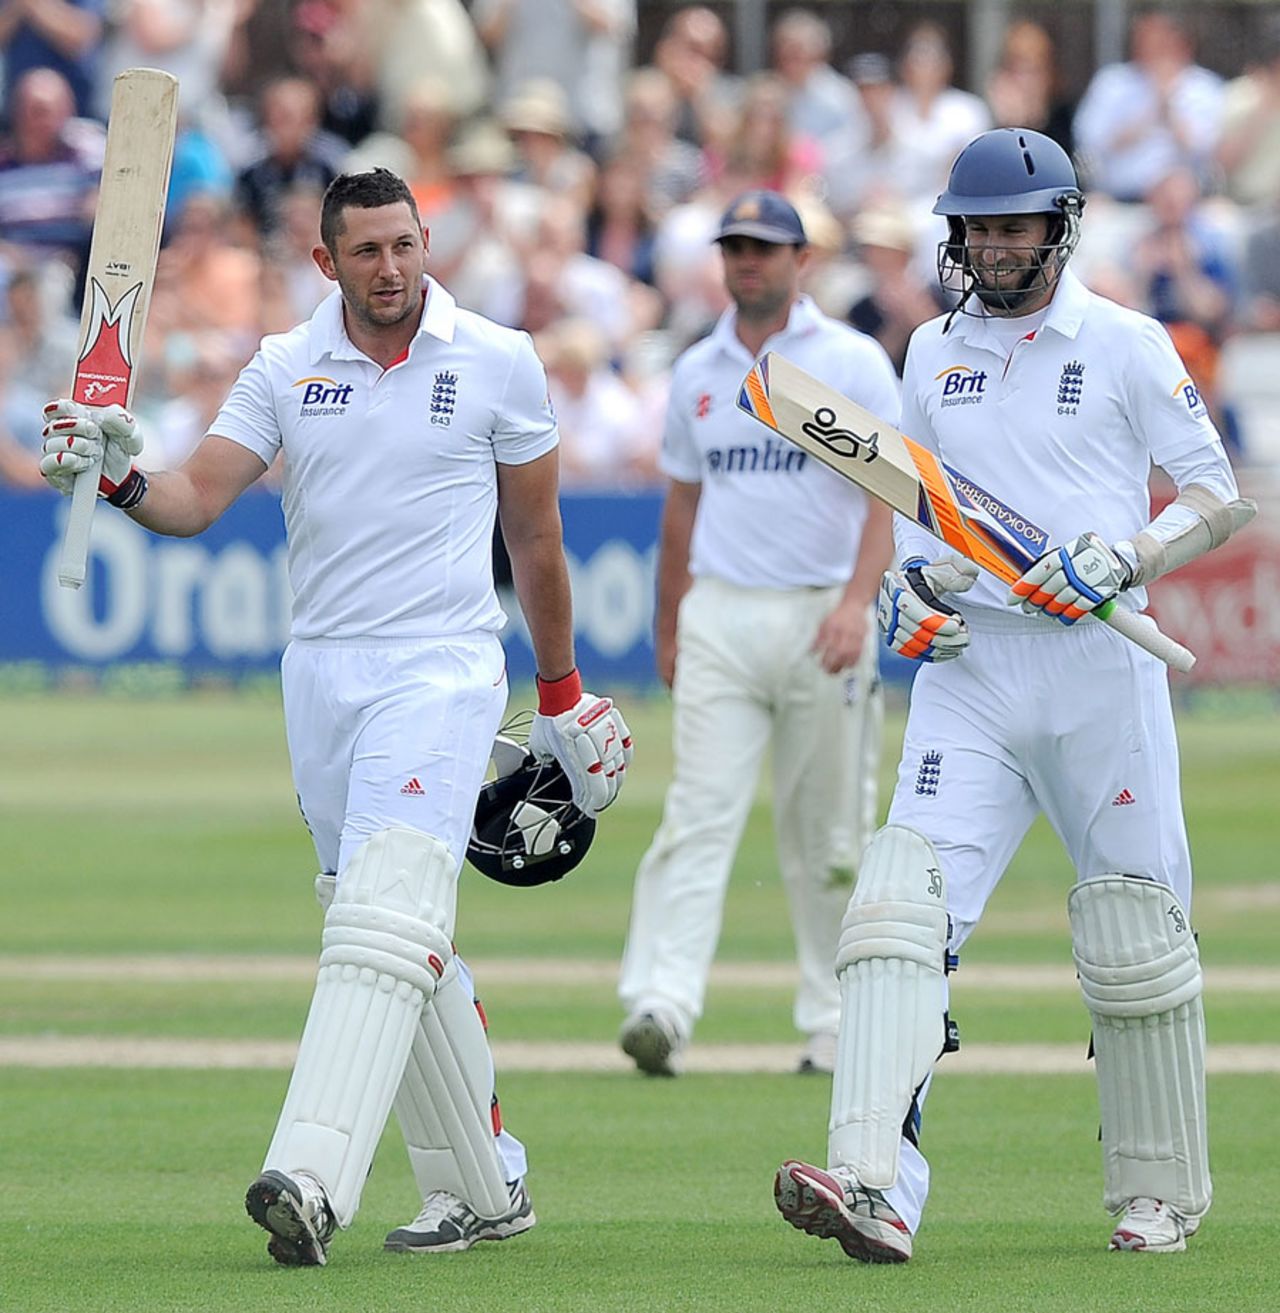 Tim Bresnan walks off with a hundred after England declared, Essex v England, 2nd day, Chelmsford, July 1, 2013